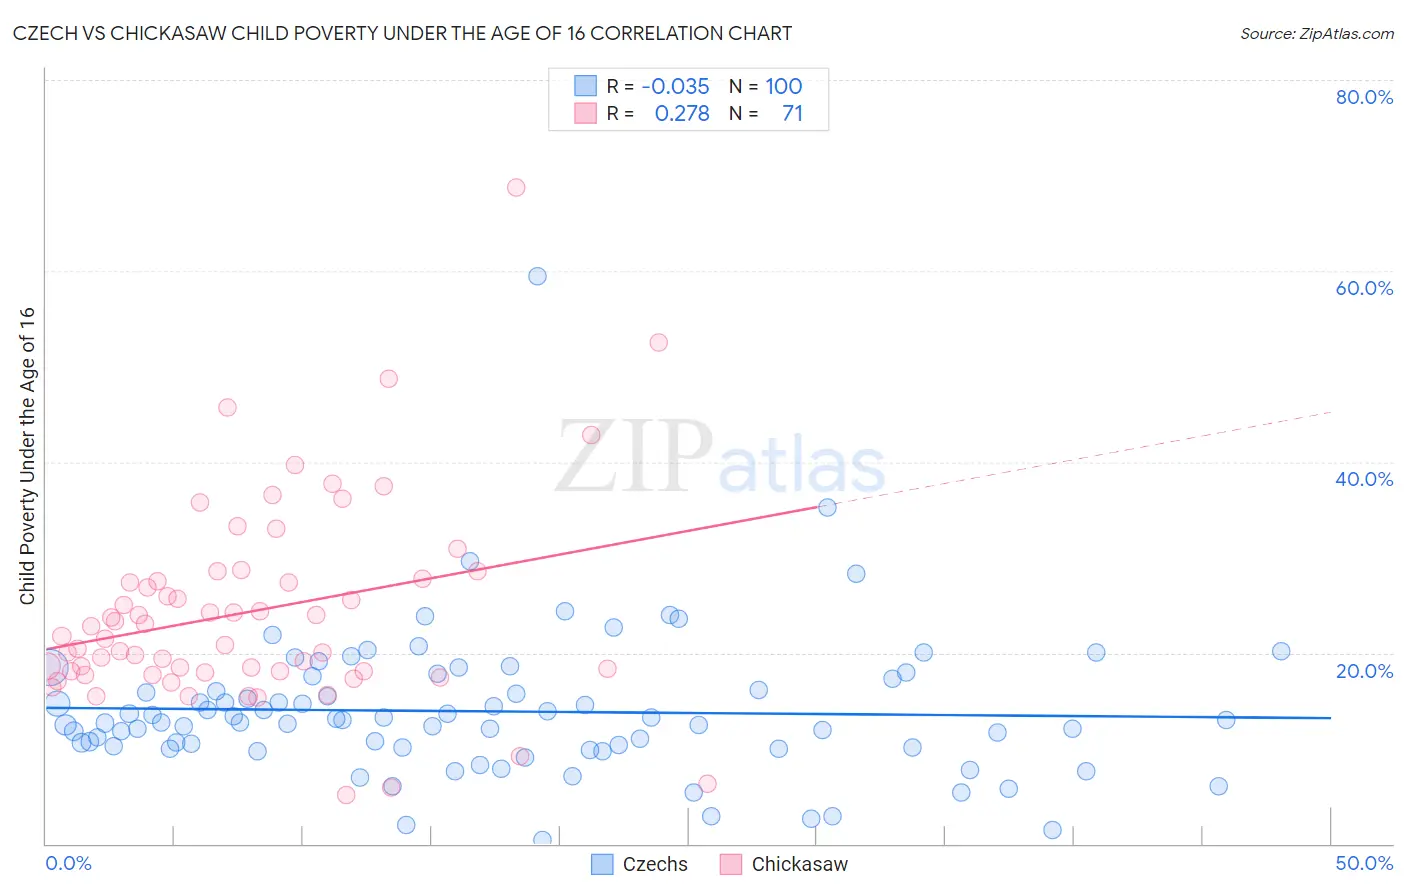 Czech vs Chickasaw Child Poverty Under the Age of 16